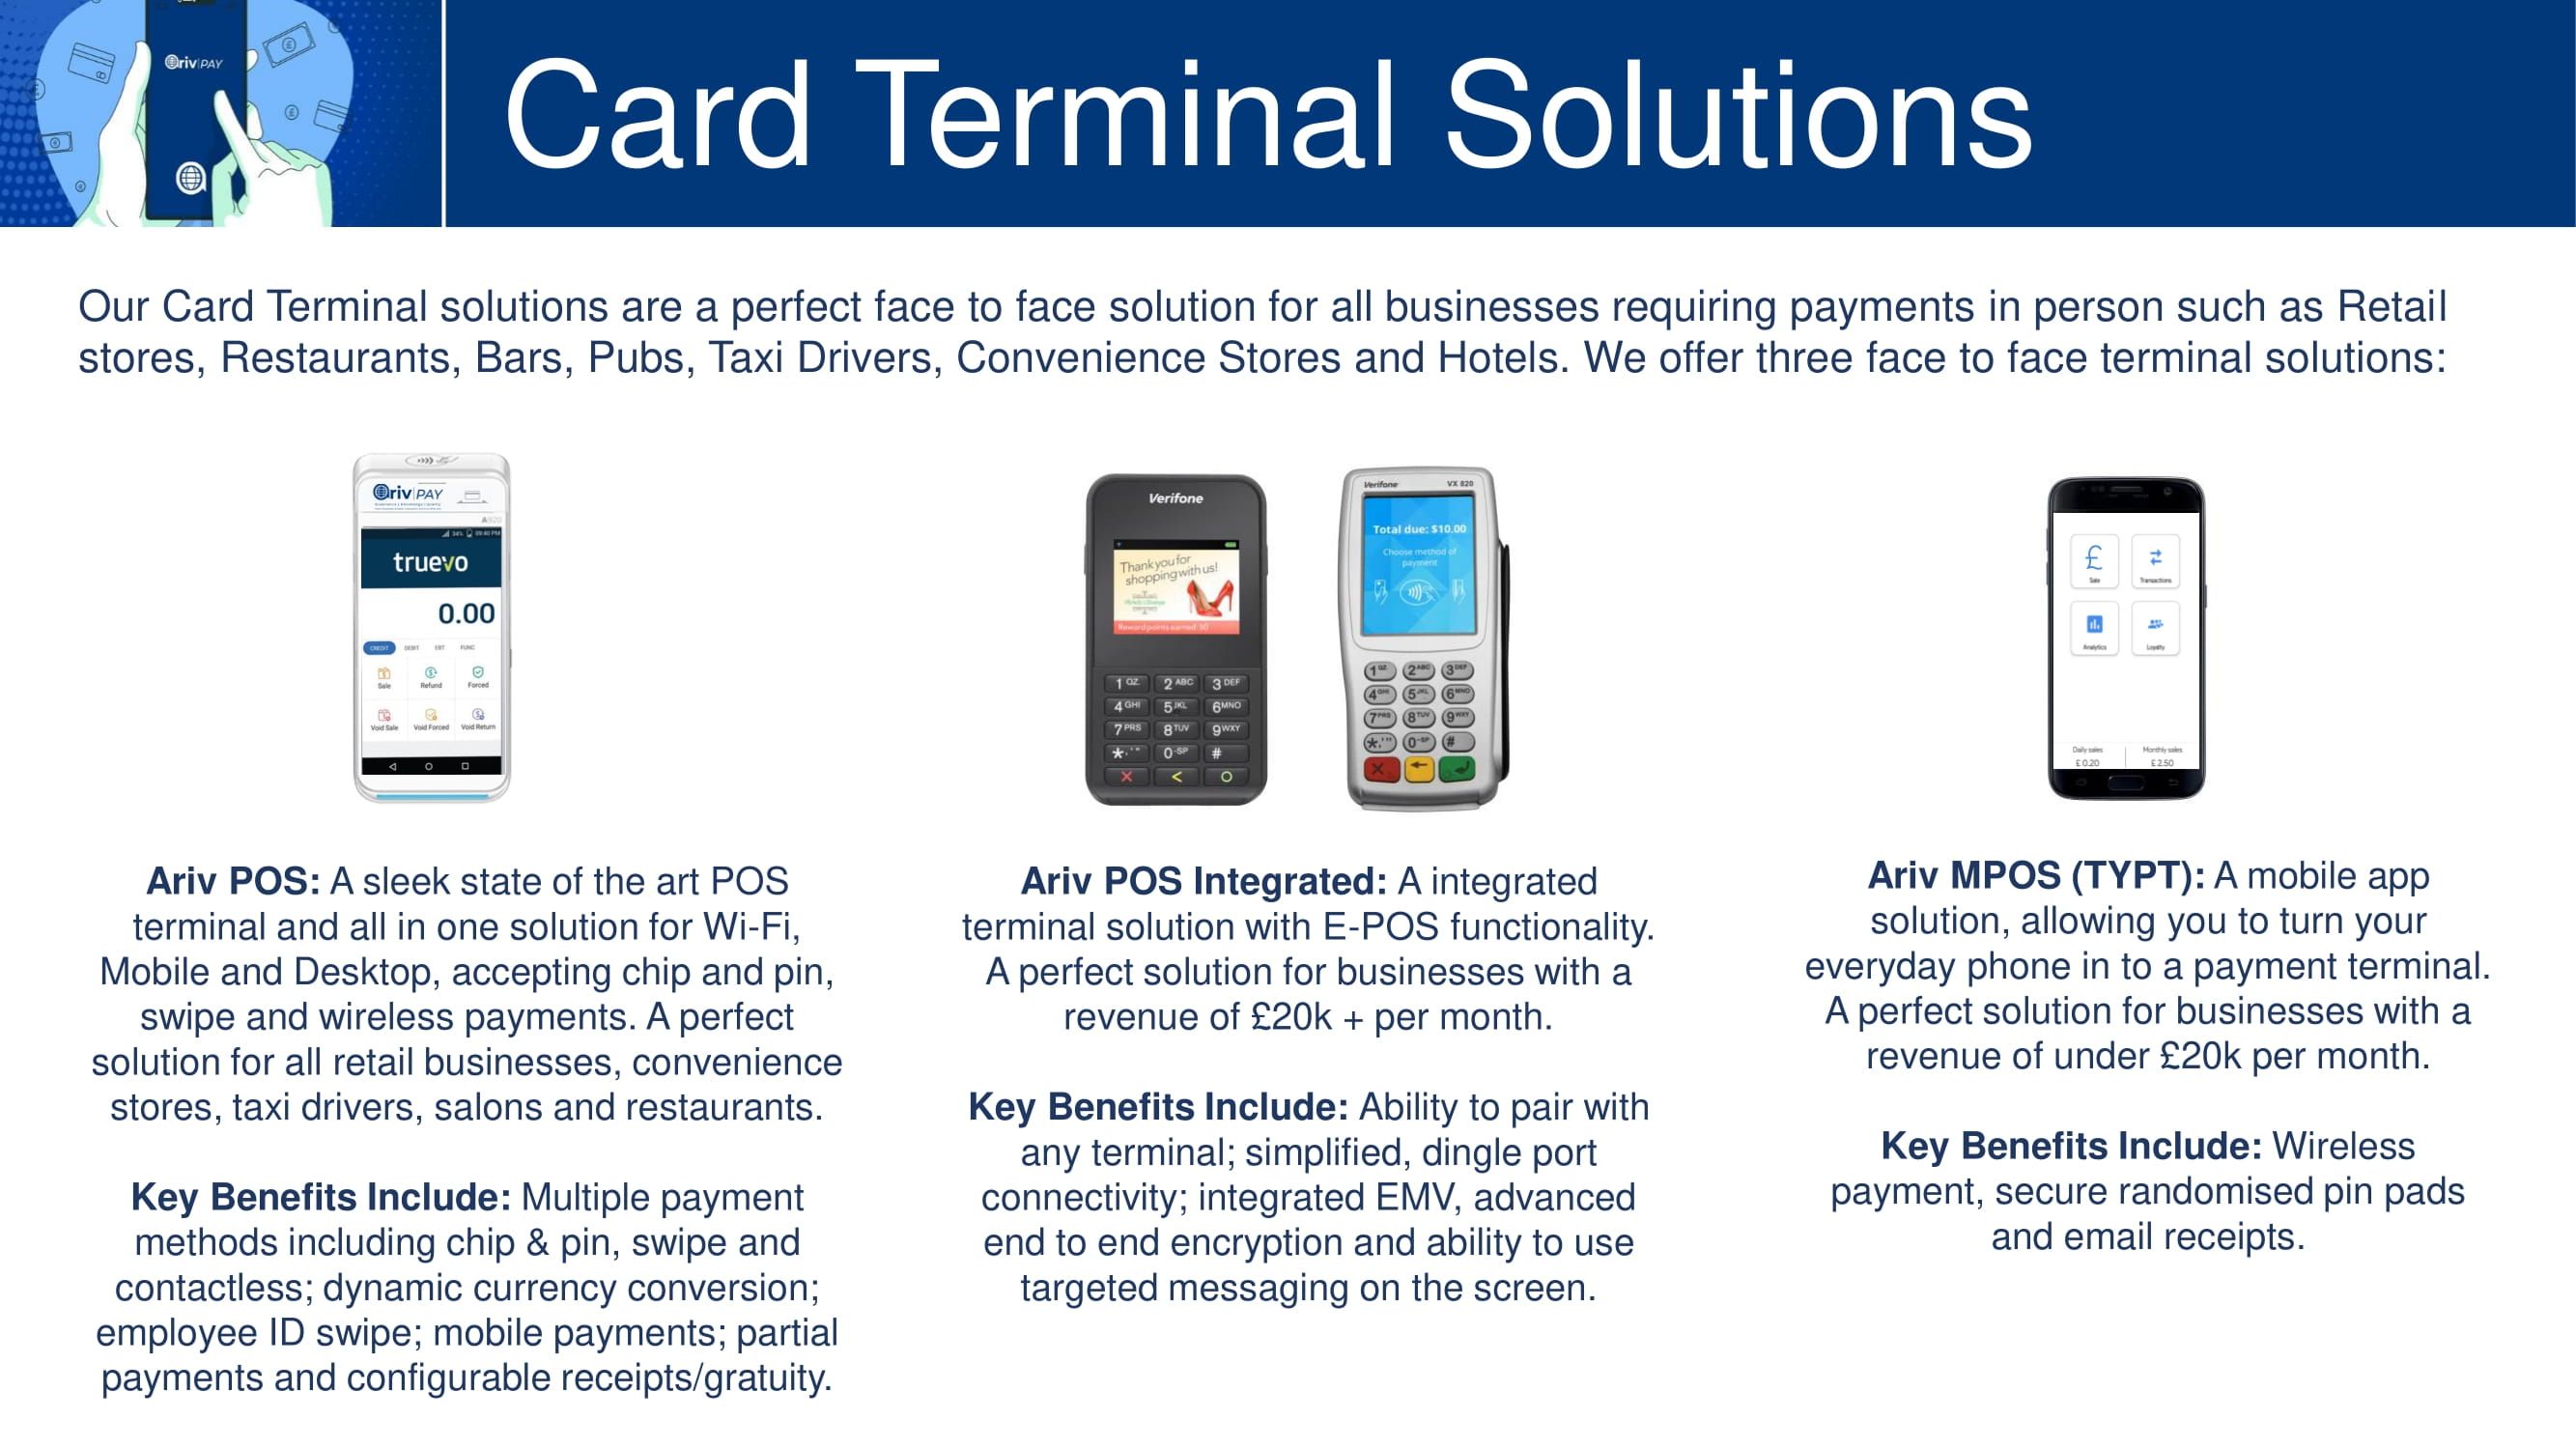 Card Terminal Solutions